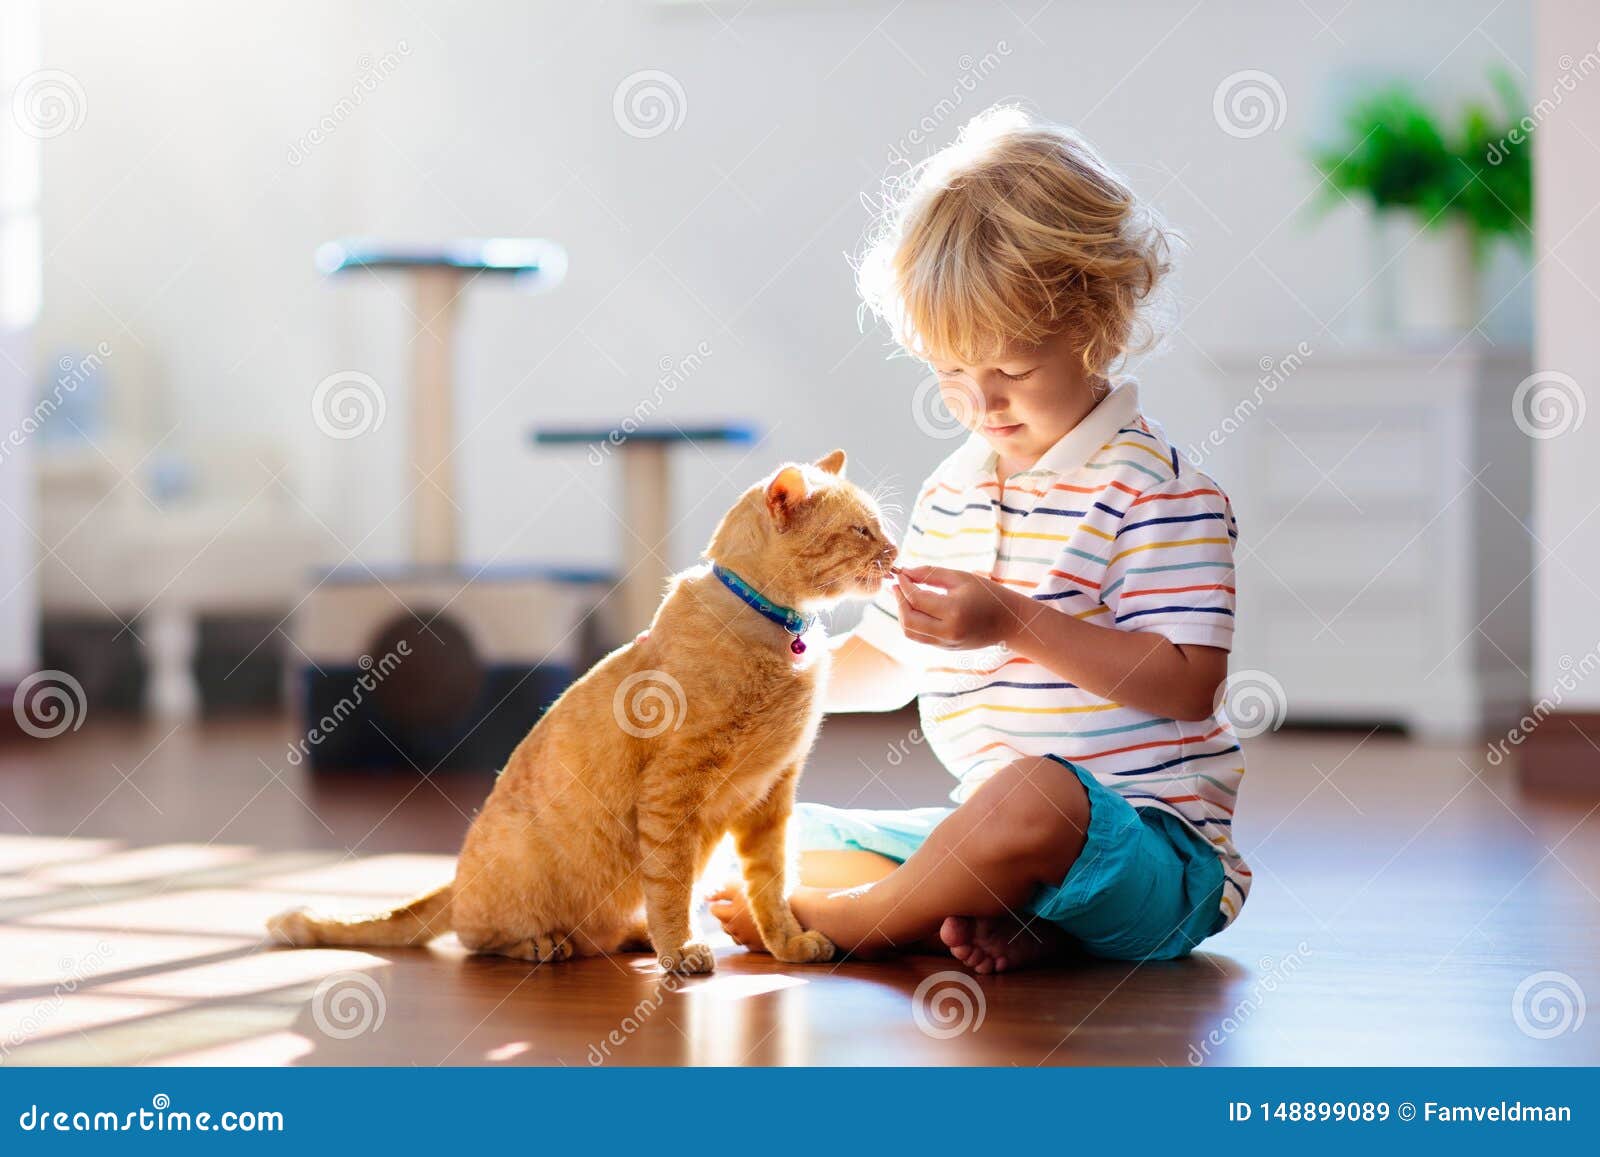 child playing with cat at home. kids and pets